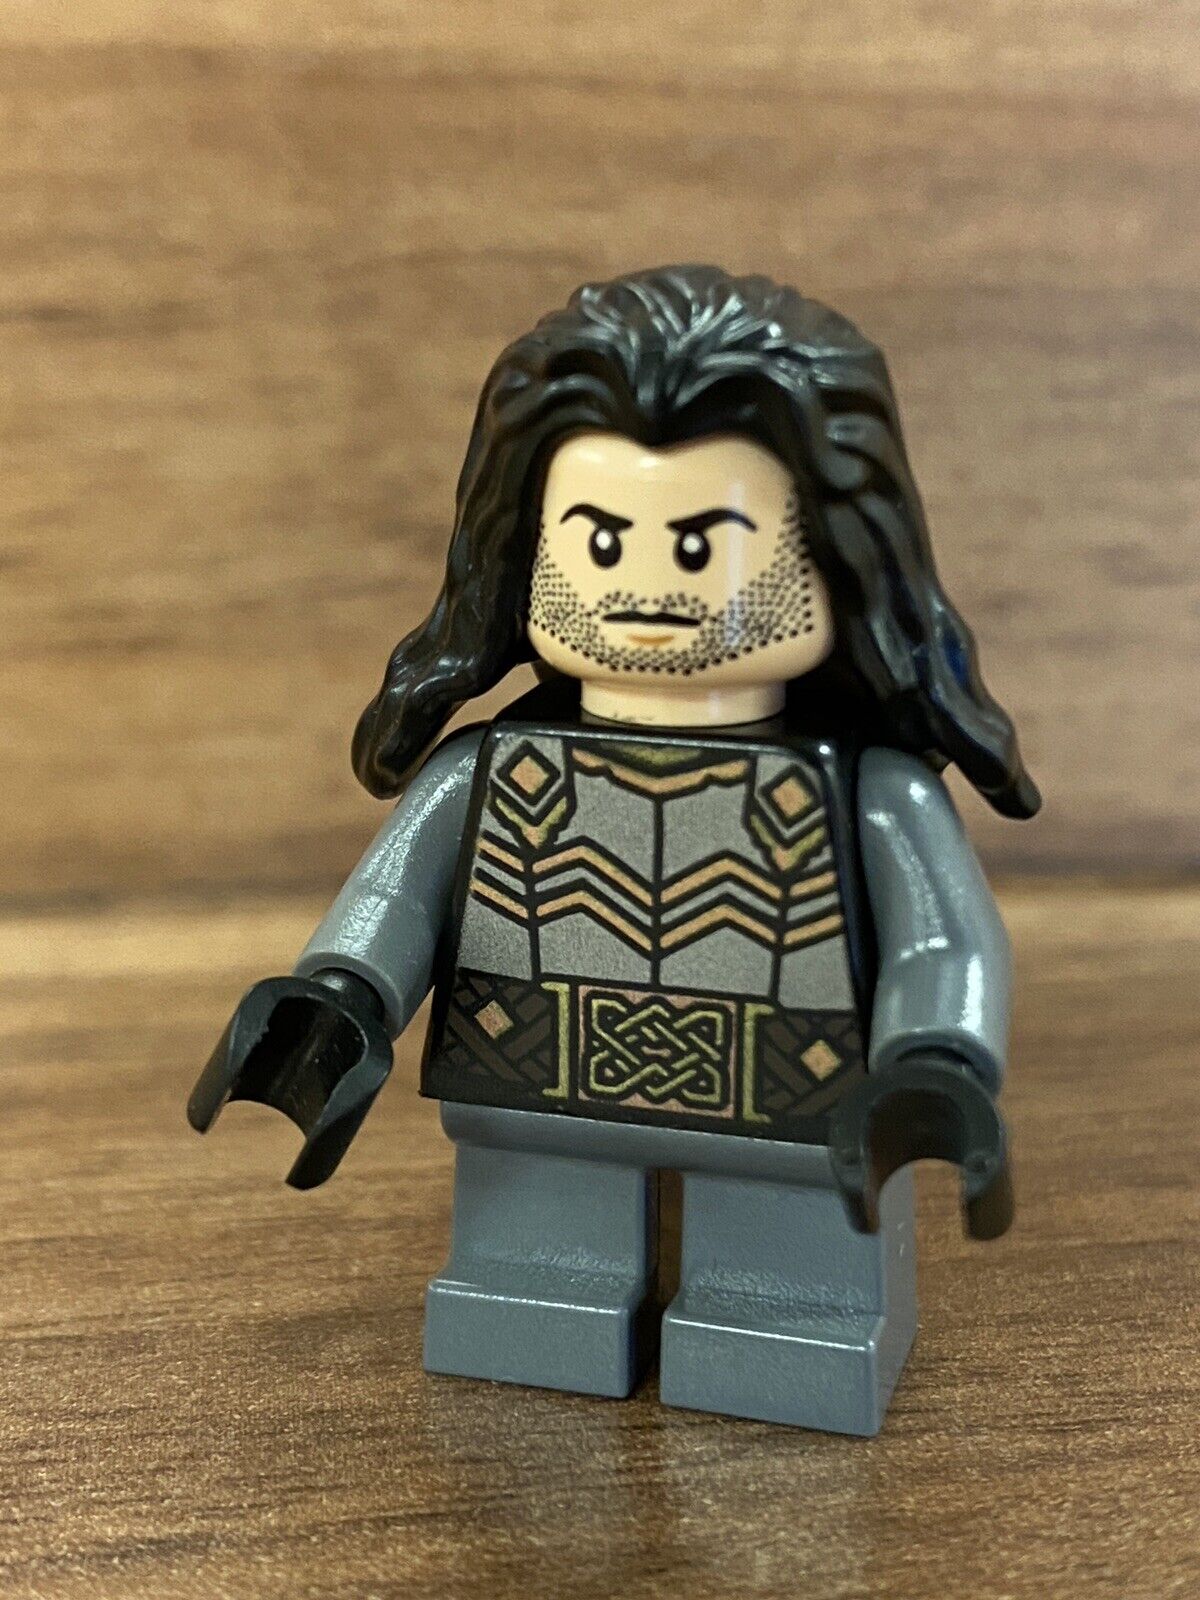 LEGO The Hobbit KILI Dwarf Minifigure from 79018 The Lonely Mountain